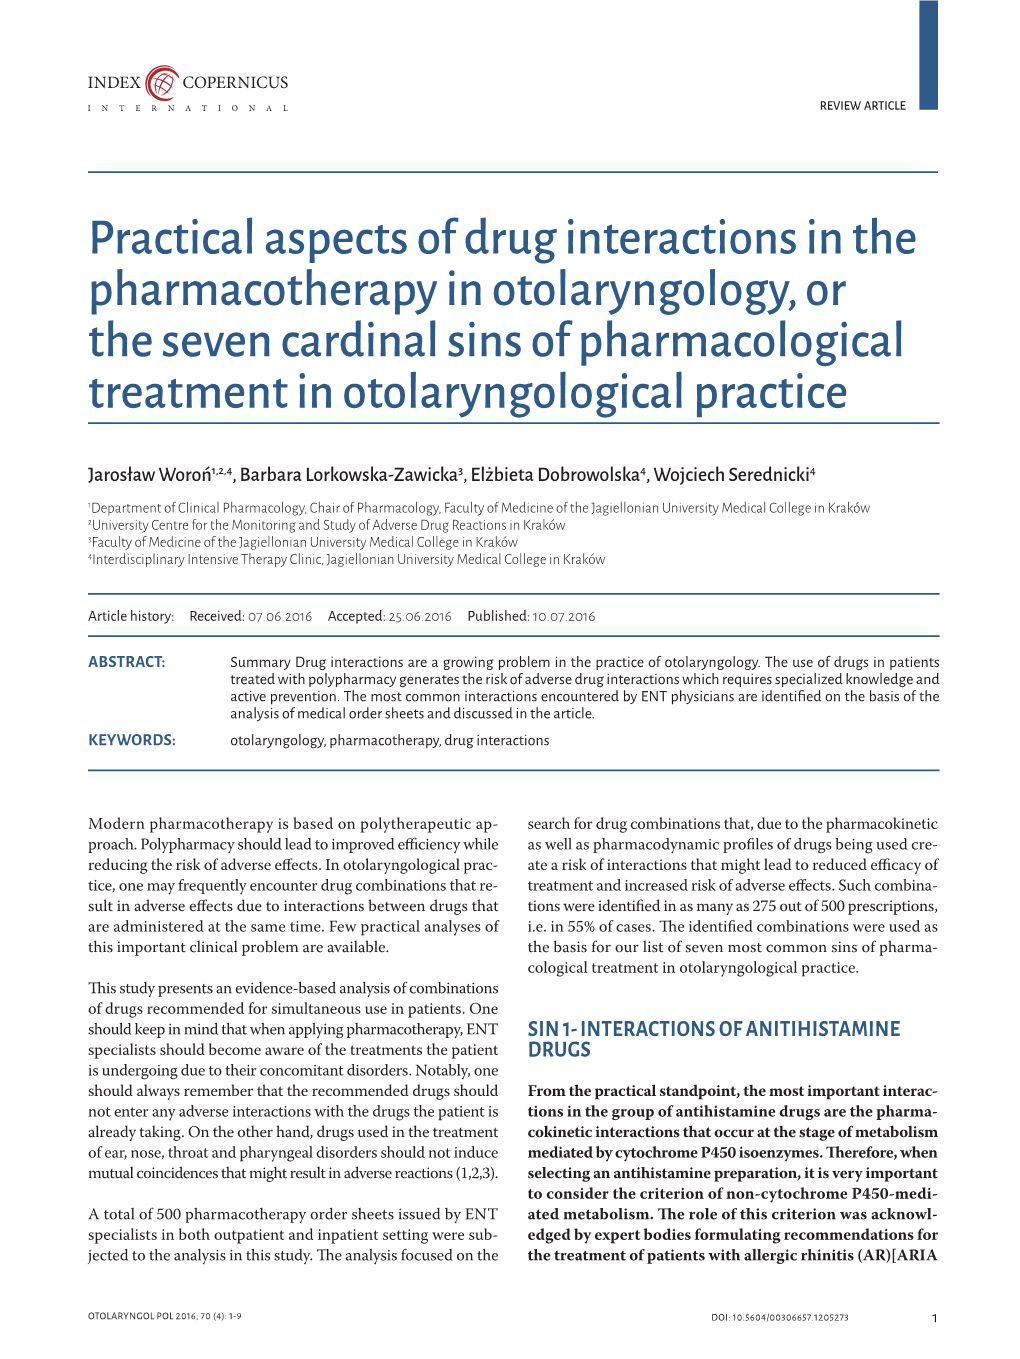 Practical Aspects of Drug Interactions in the Pharmacotherapy in Otolaryngology, Or the Seven Cardinal Sins of Pharmacological Treatment in Otolaryngological Practice